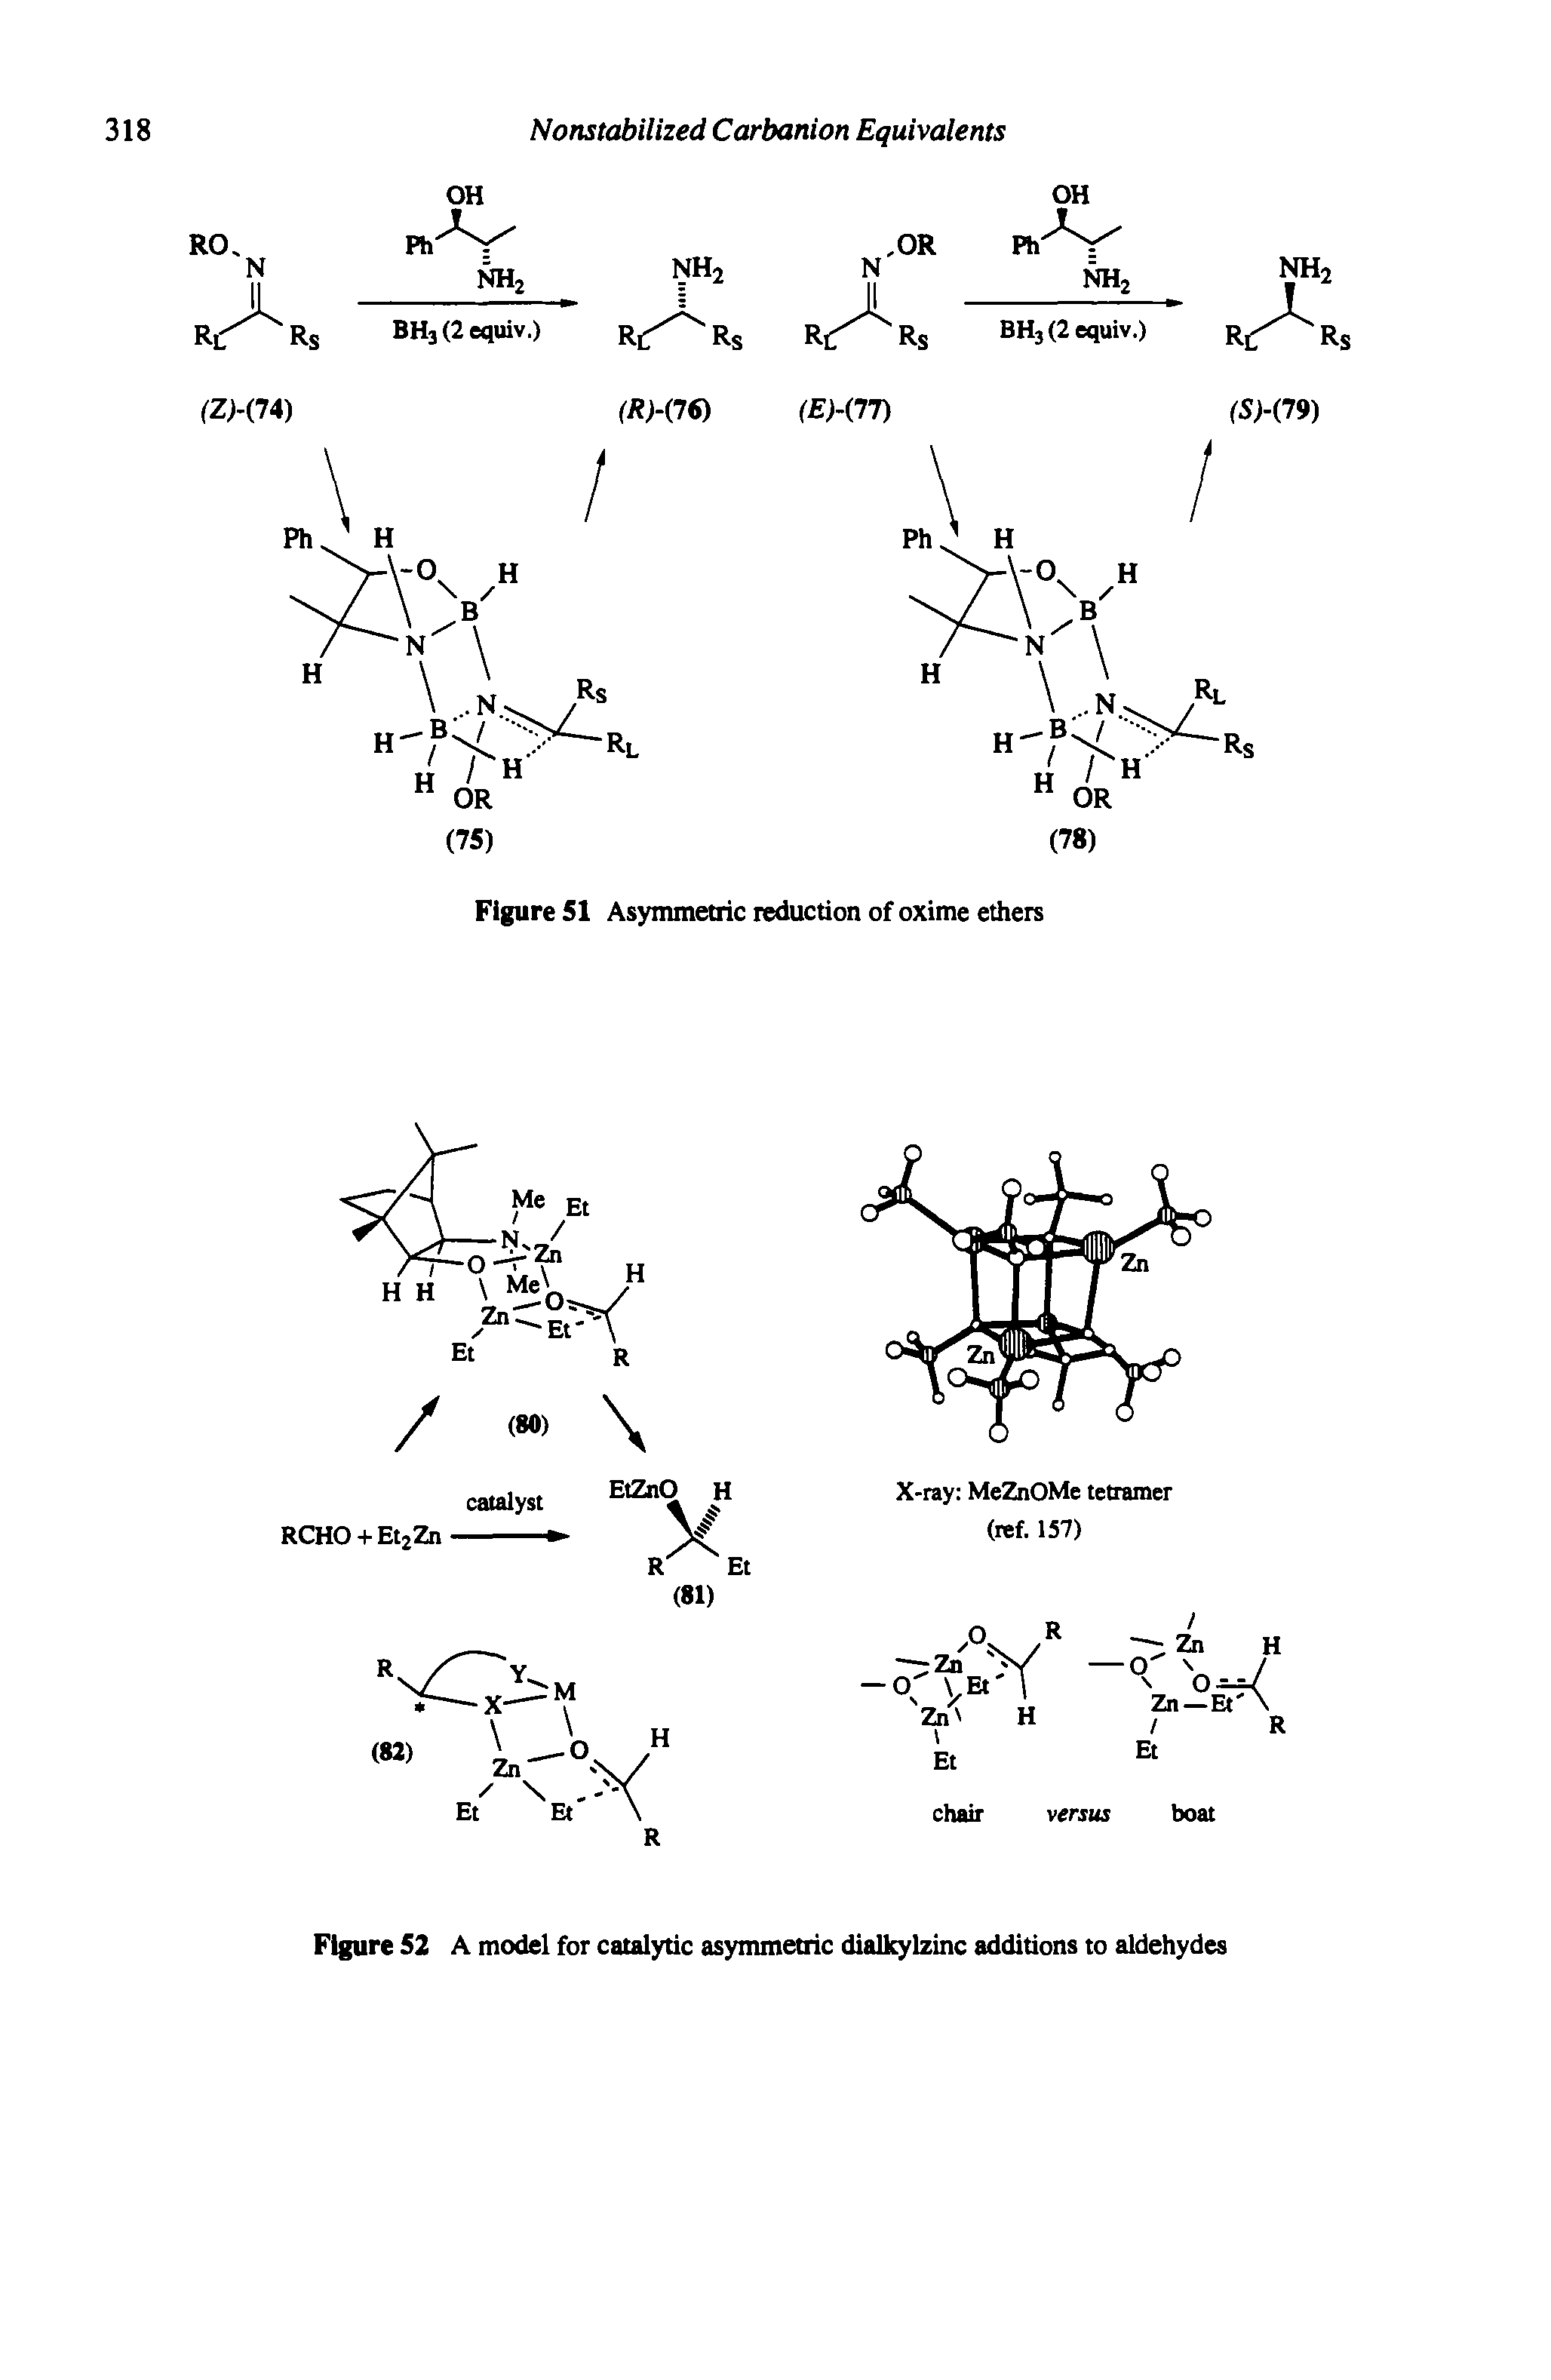 Figure 52 A model for catalytic asymmetric dialkylzinc additions to aldehydes...